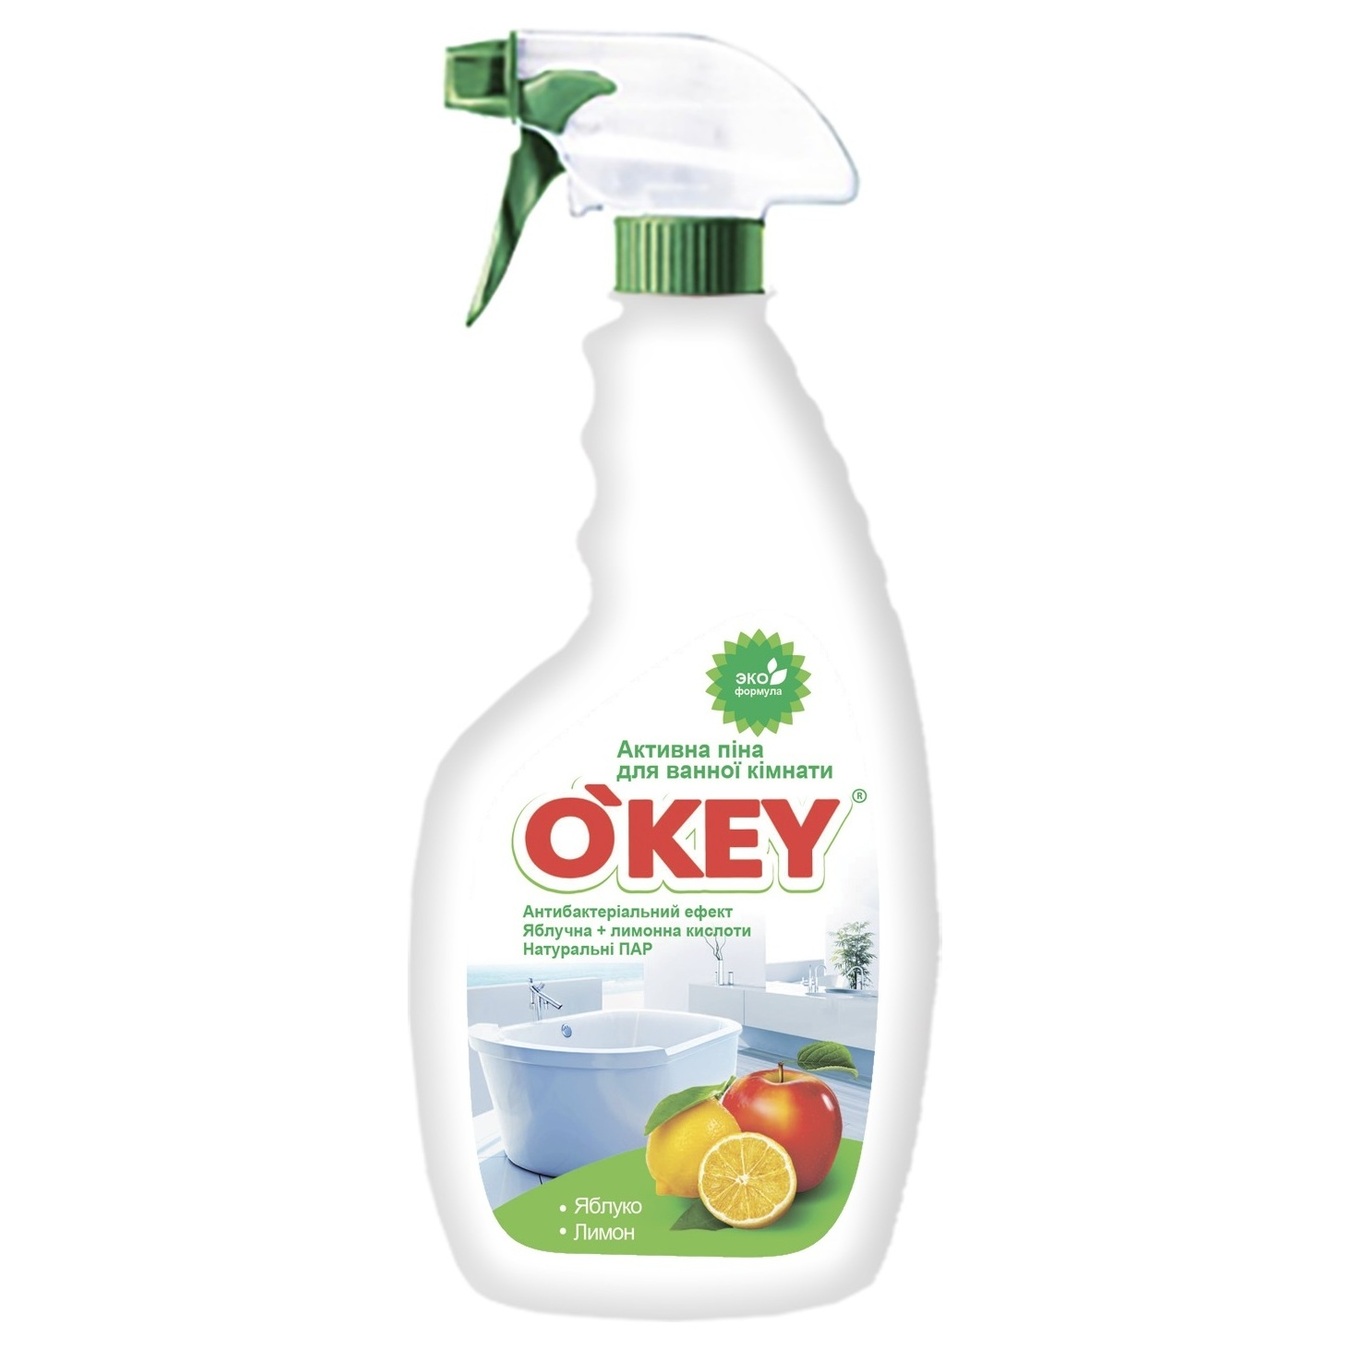 OKey foam for cleaning the bathroom active 500ml